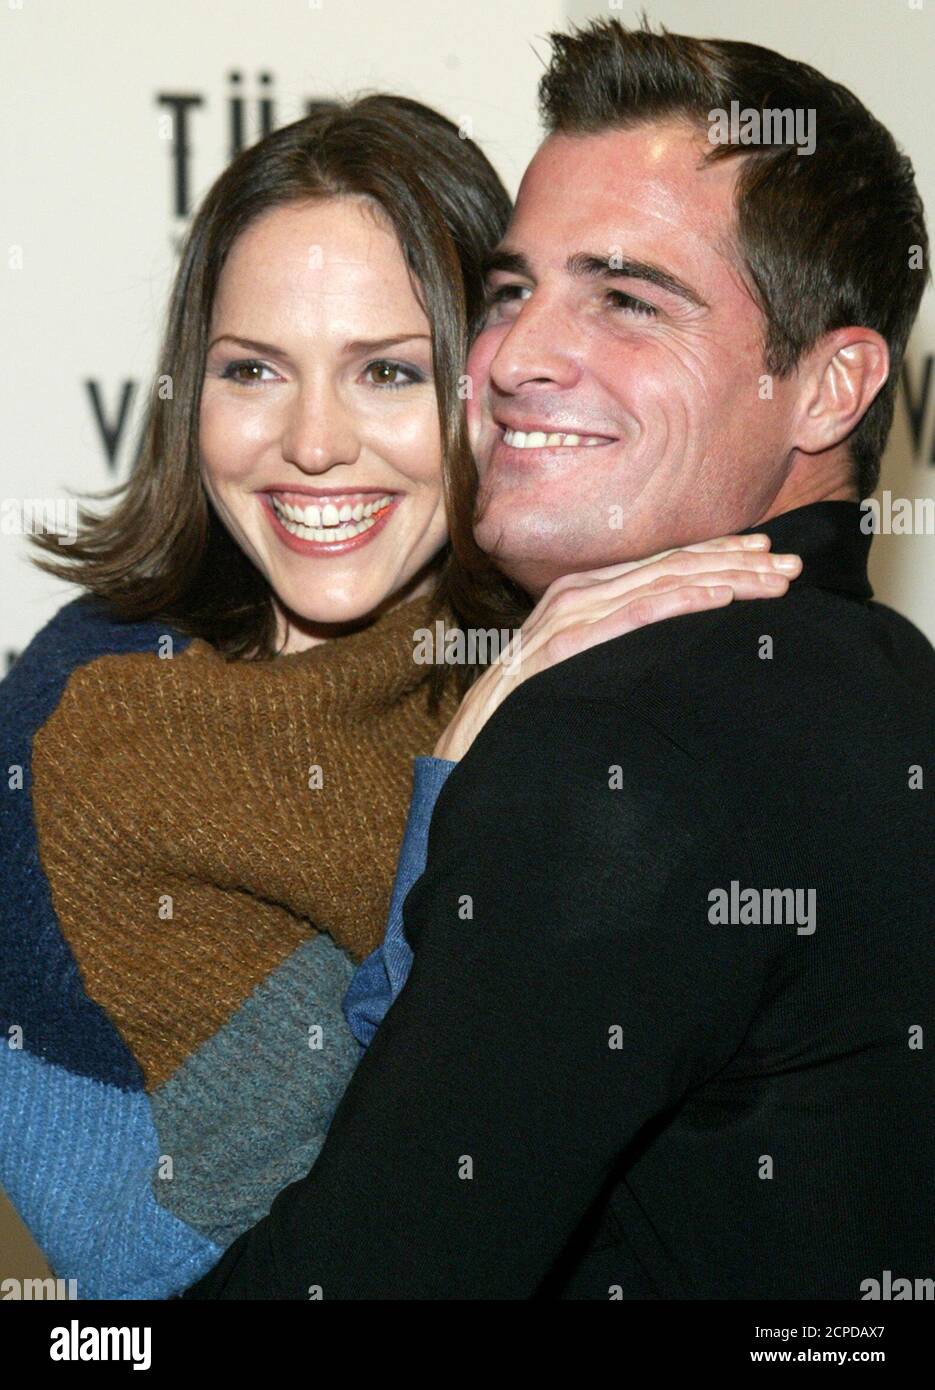 CSI: Crime Scene Investigation cast members Jorja Fox (L) and George Eads  embrace before a party at the Light nightclub in Las Vegas, Nevada on Dec.  14, 2003. The pair were fired